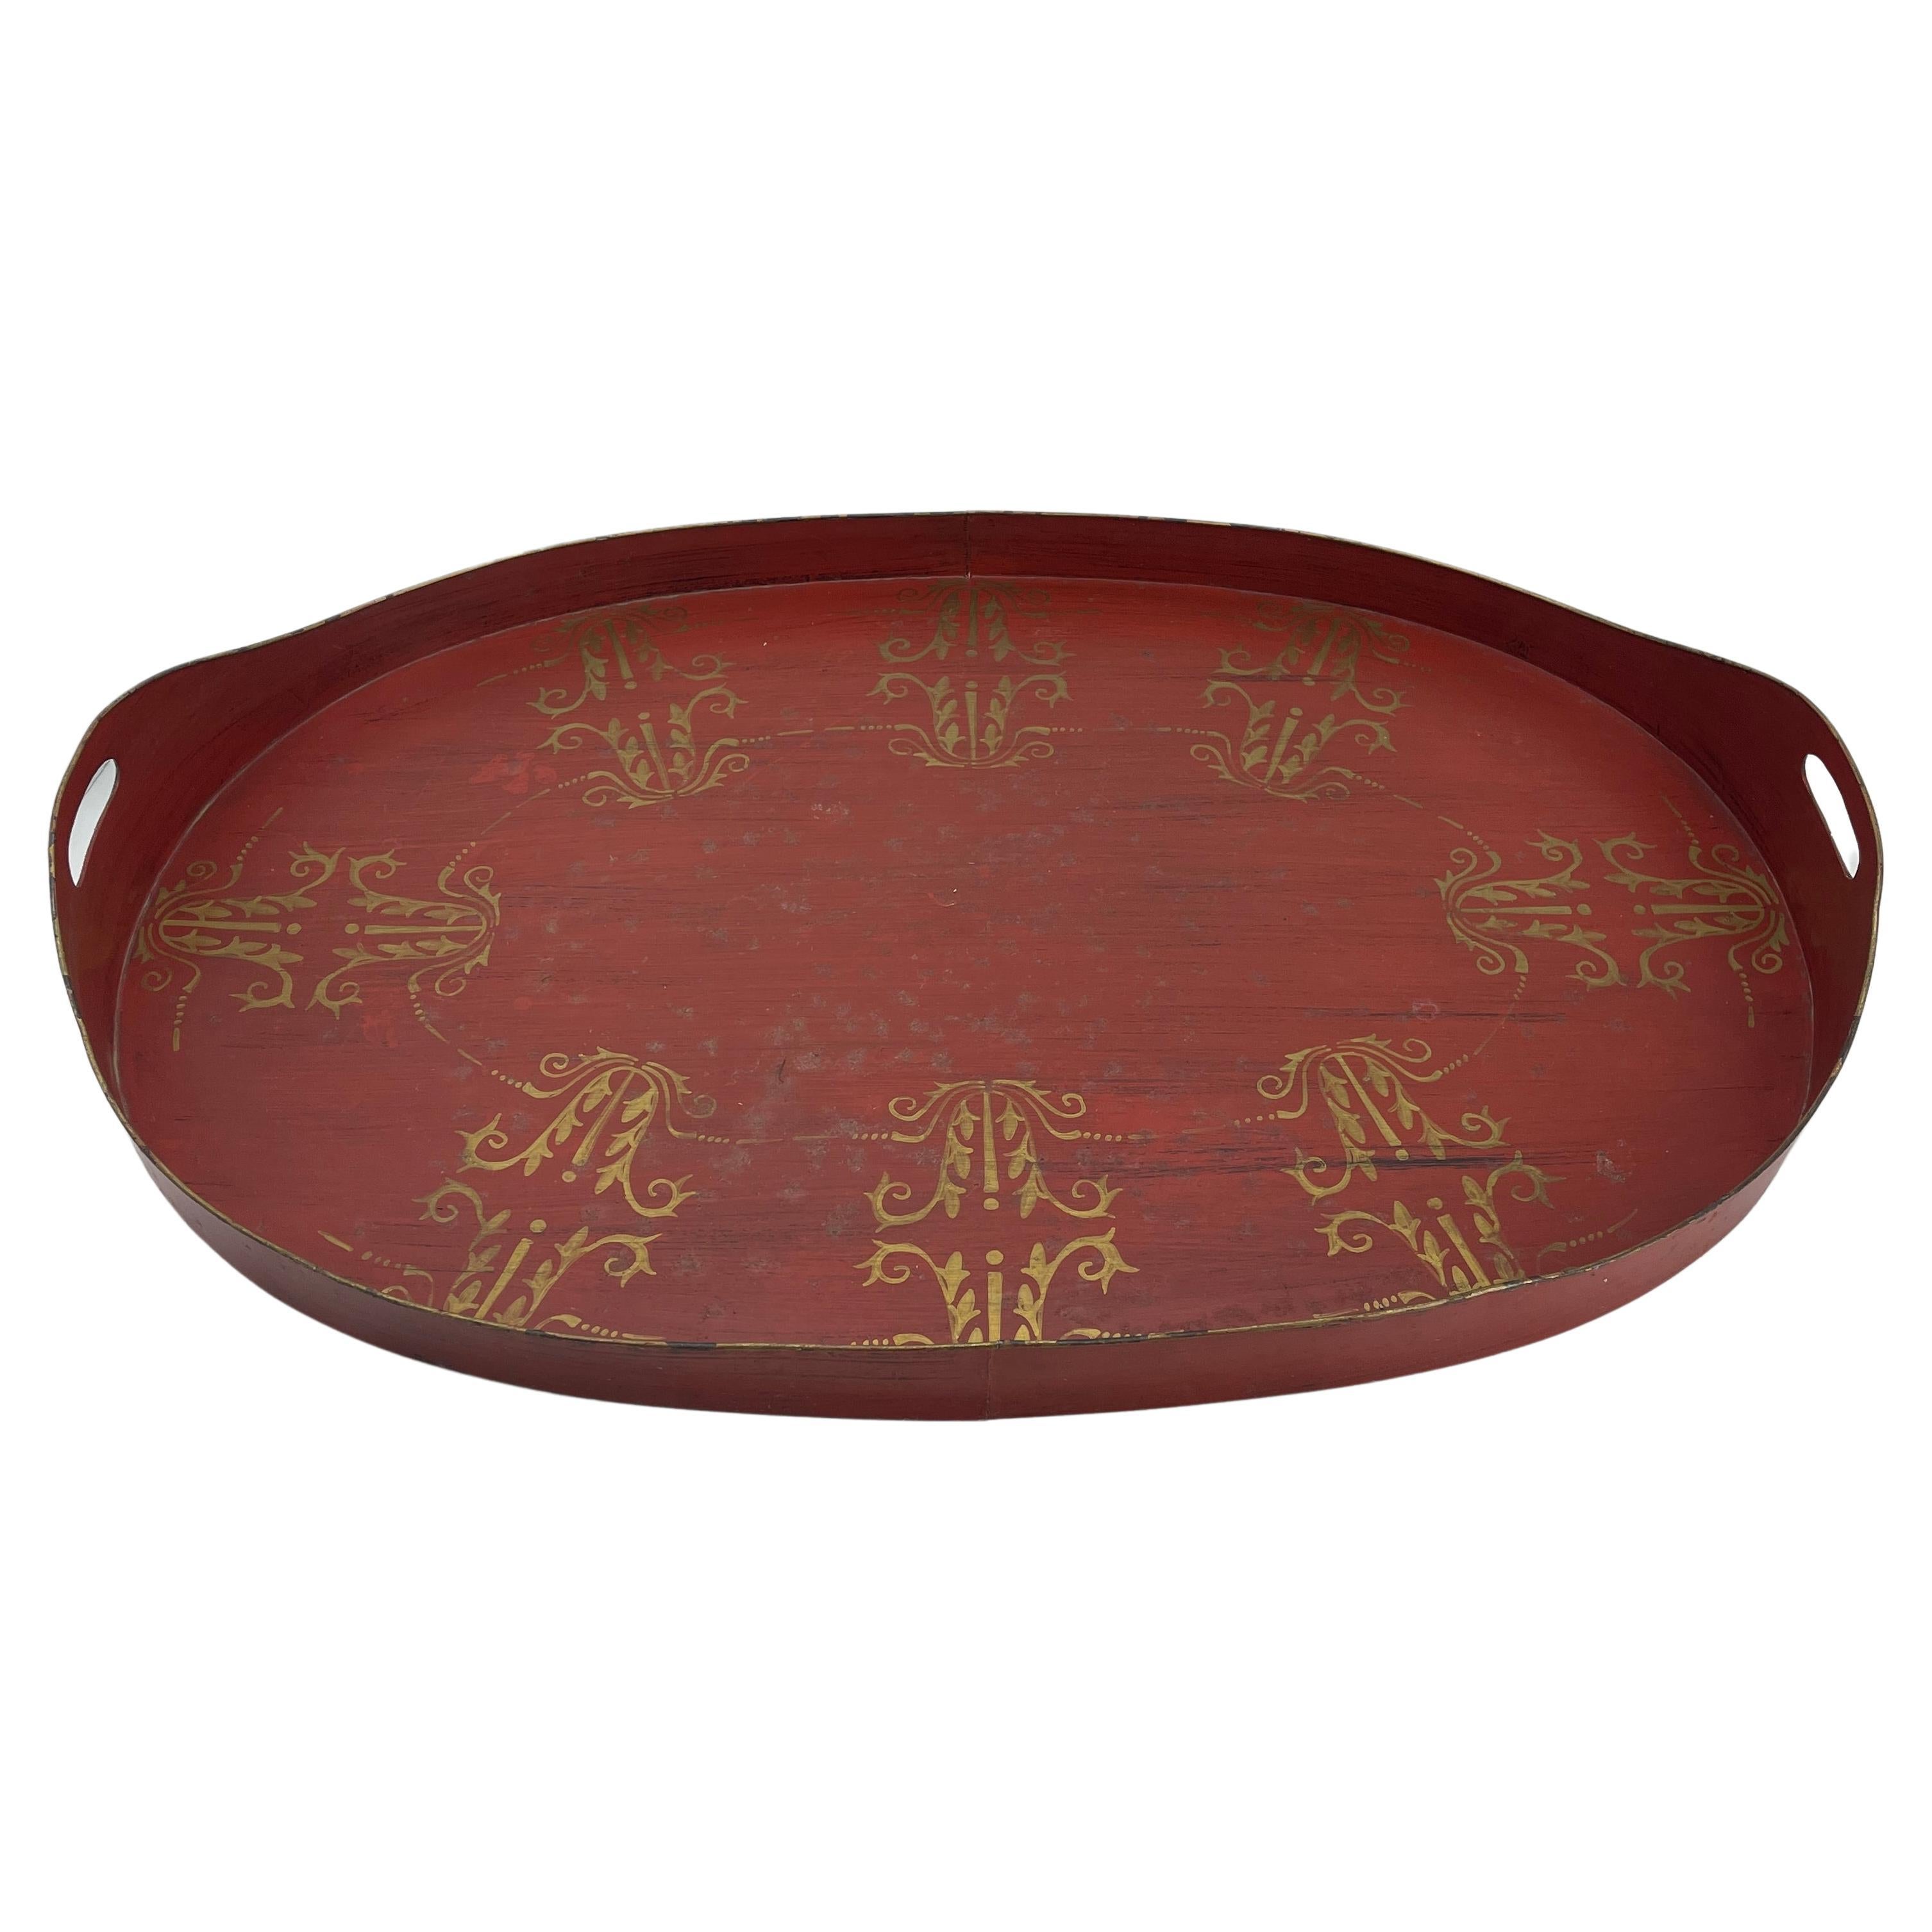 Hand-painted in the mid to late 19th century France, this red antique oval toleware tray with side handles features gold scroll patterns. This large impressive antique tray could be used on a coffee table or hang on a wall.